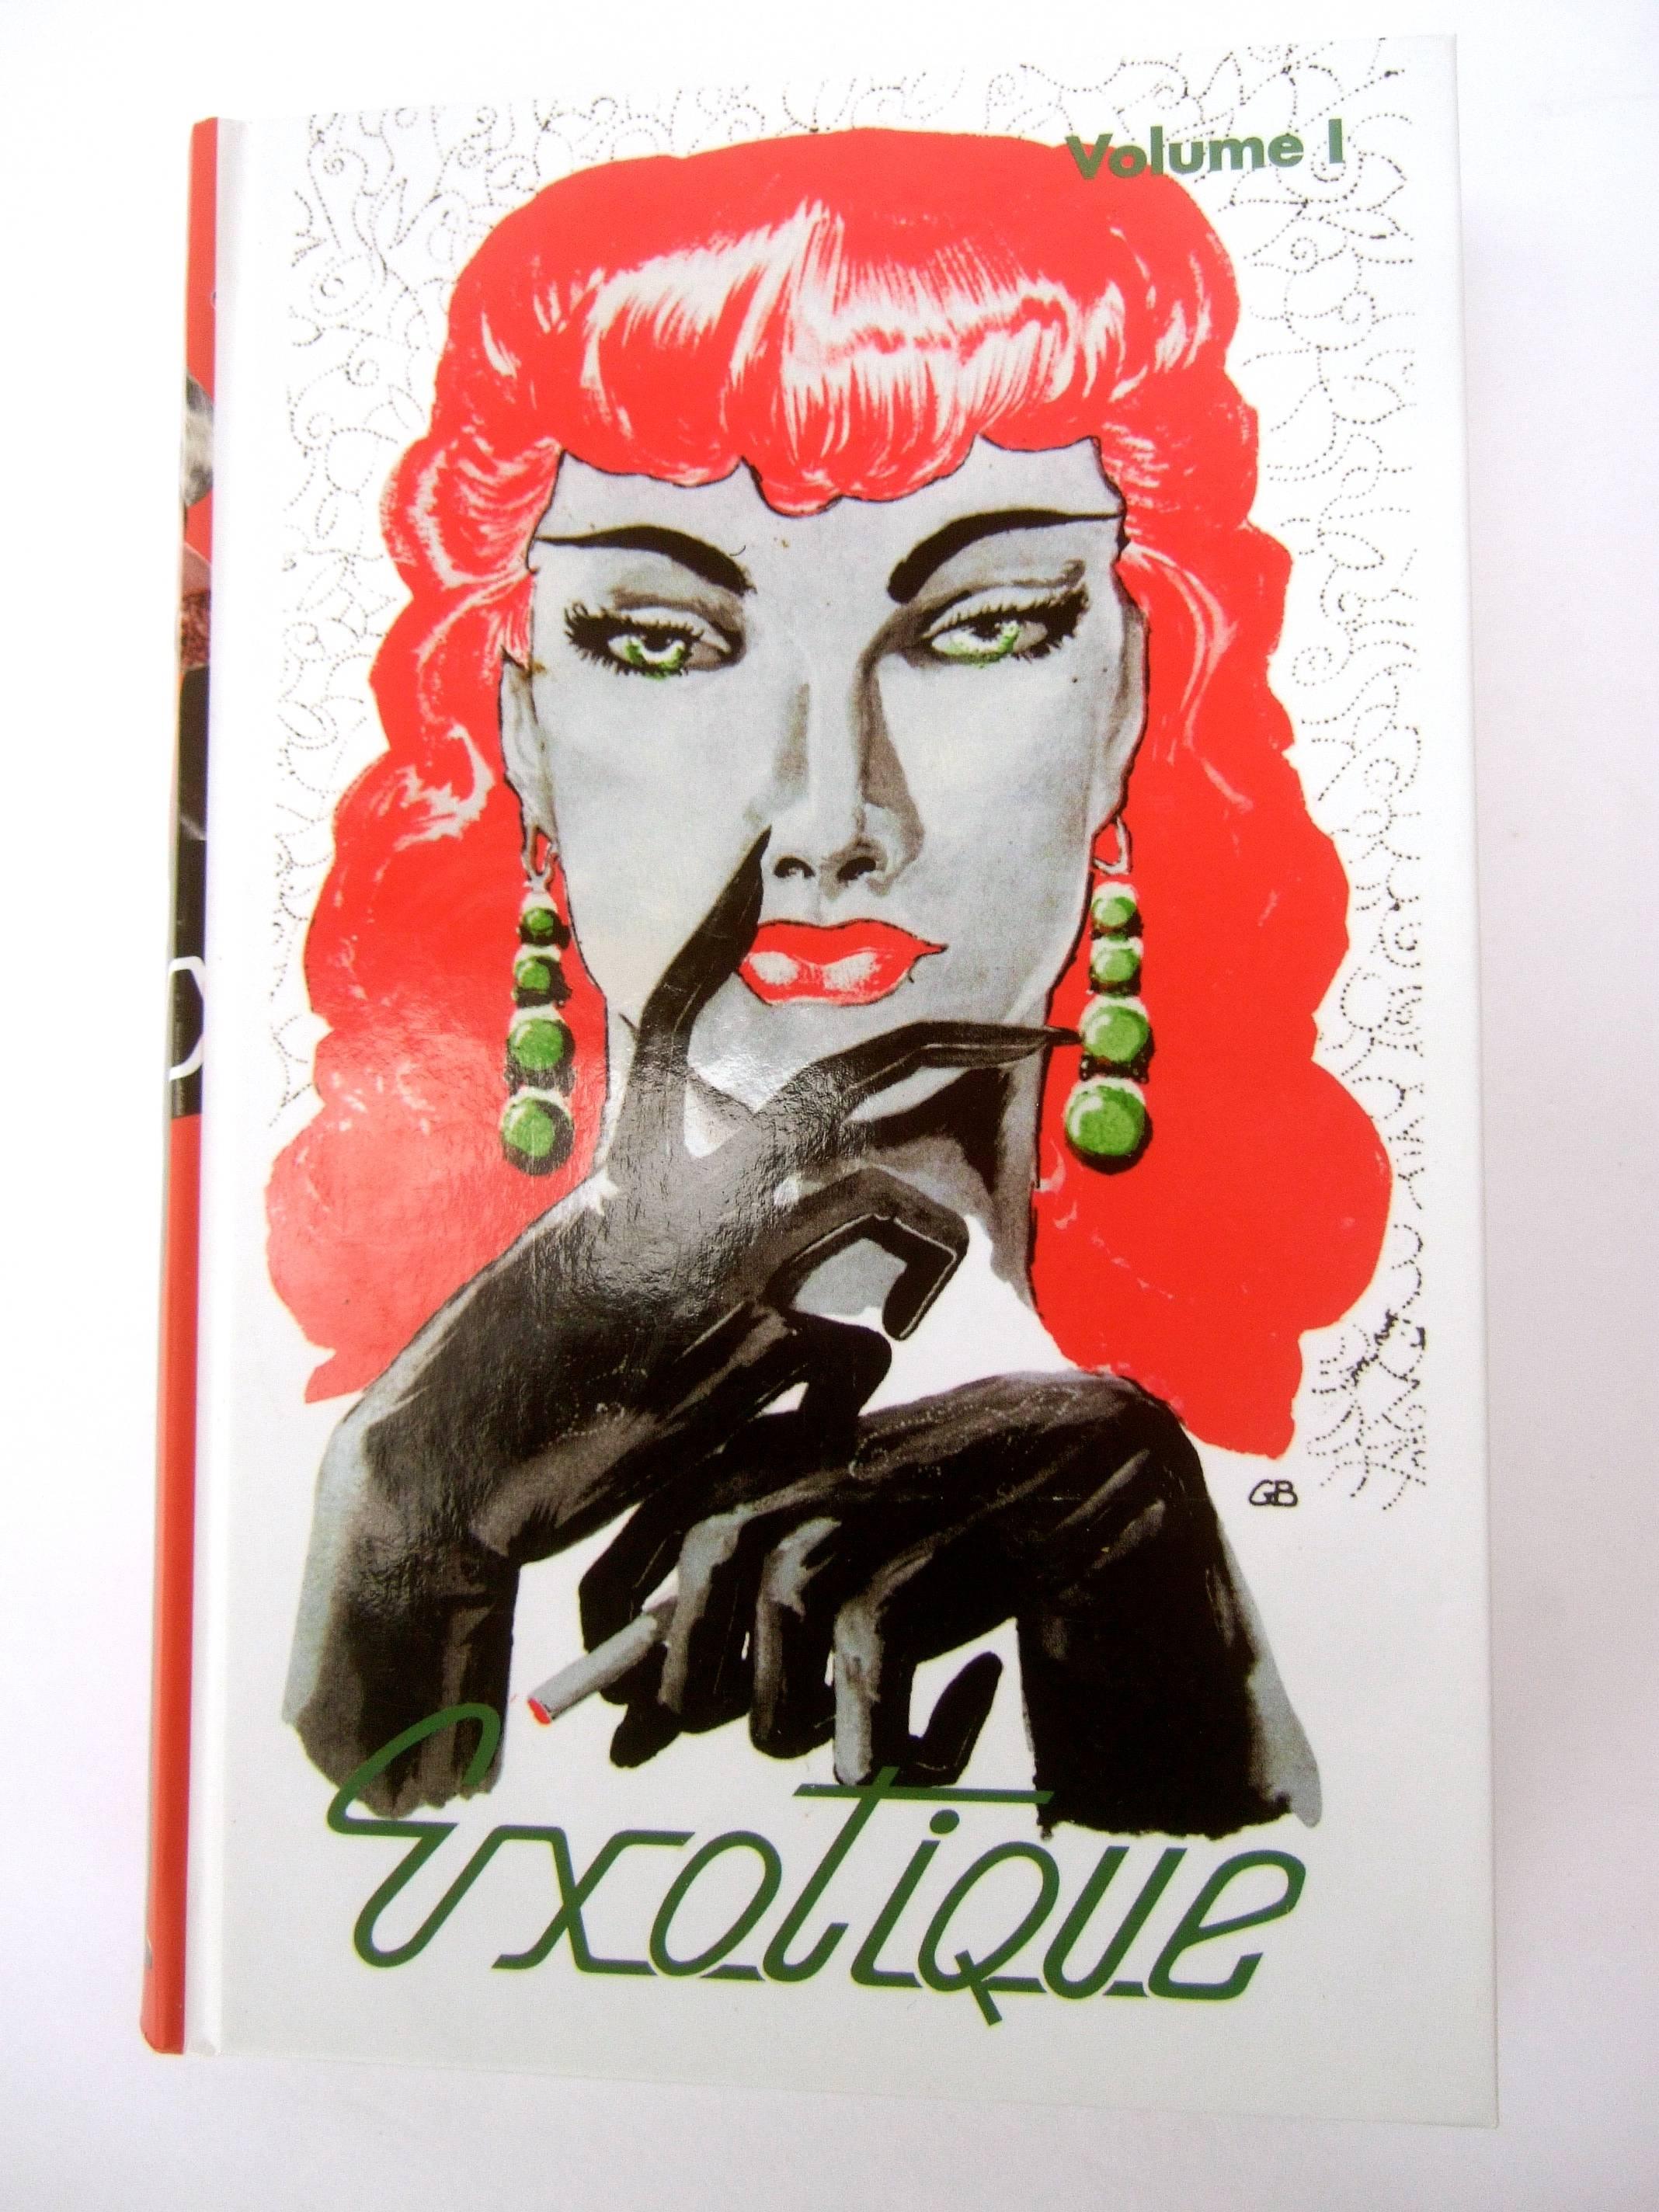 Exotique trilogy set of avant-garde hardcover books in cardboard case 
The set of erotic books is an archive and reprint of 36 issues 
of magazines originally from 1951 thru 1957. Compiled in three
volumes in hardcover book form reprinted in 1998